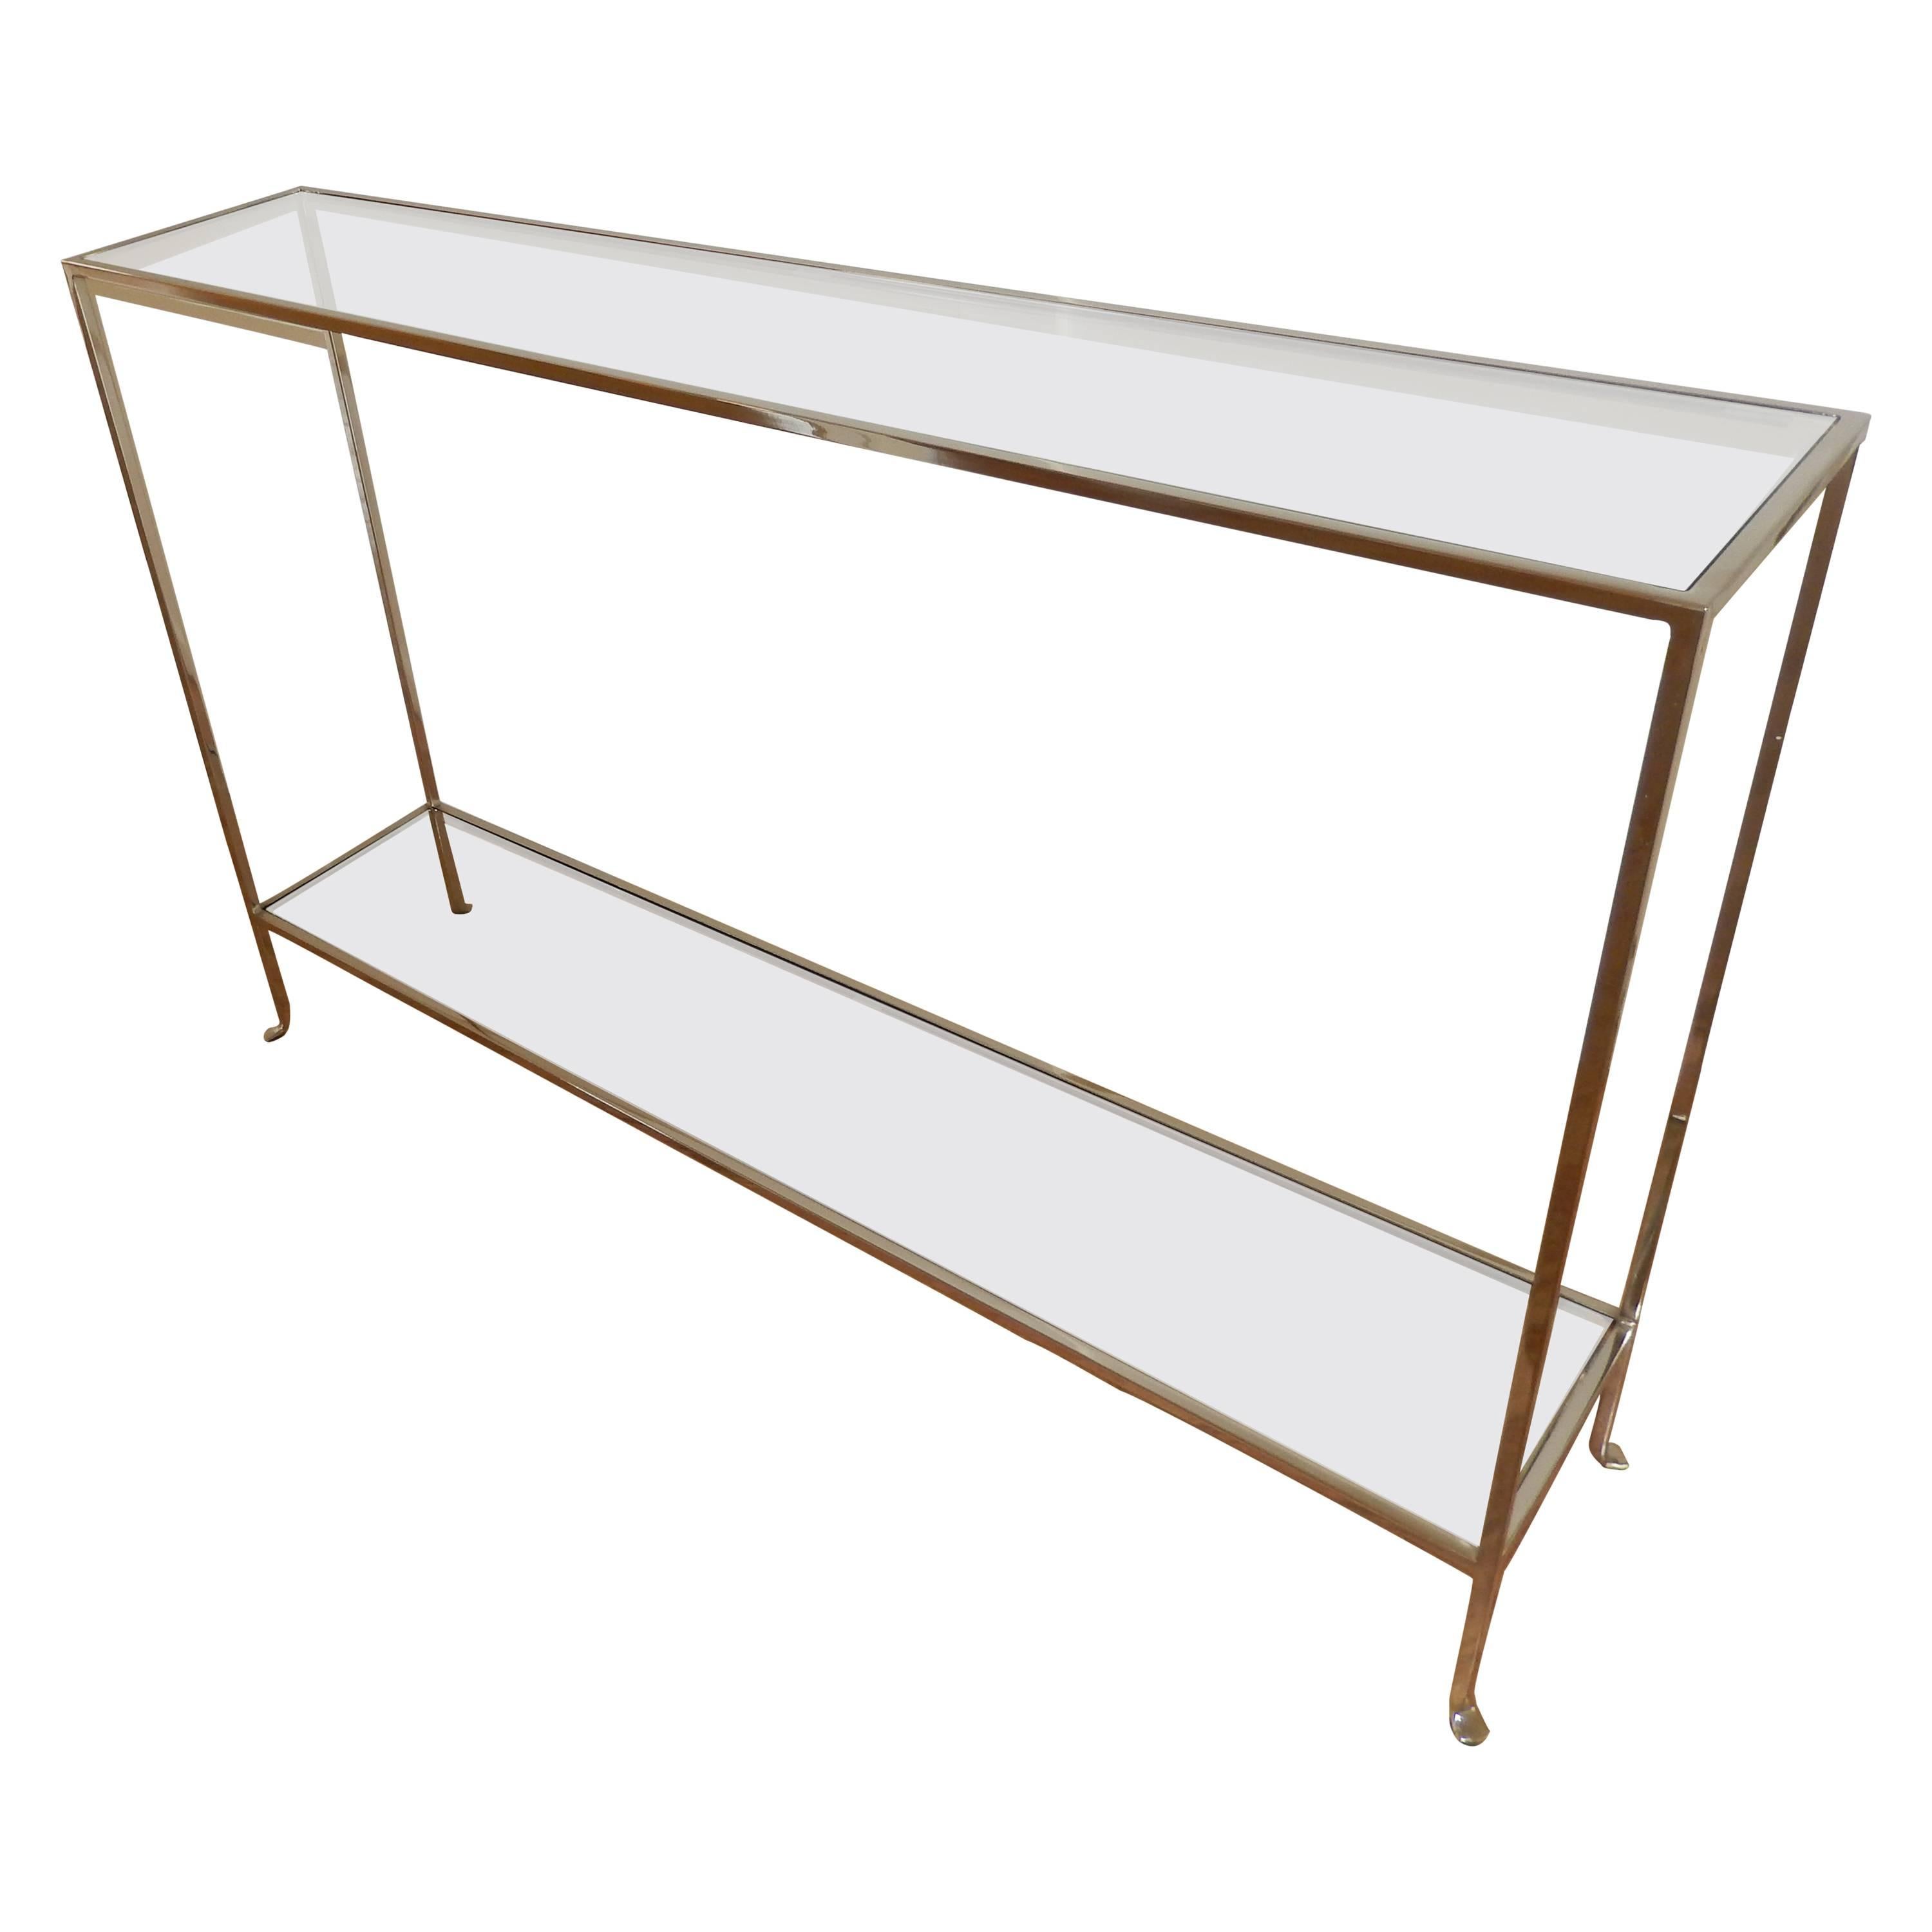 Nickel and Glass Two Level Modern Console Table